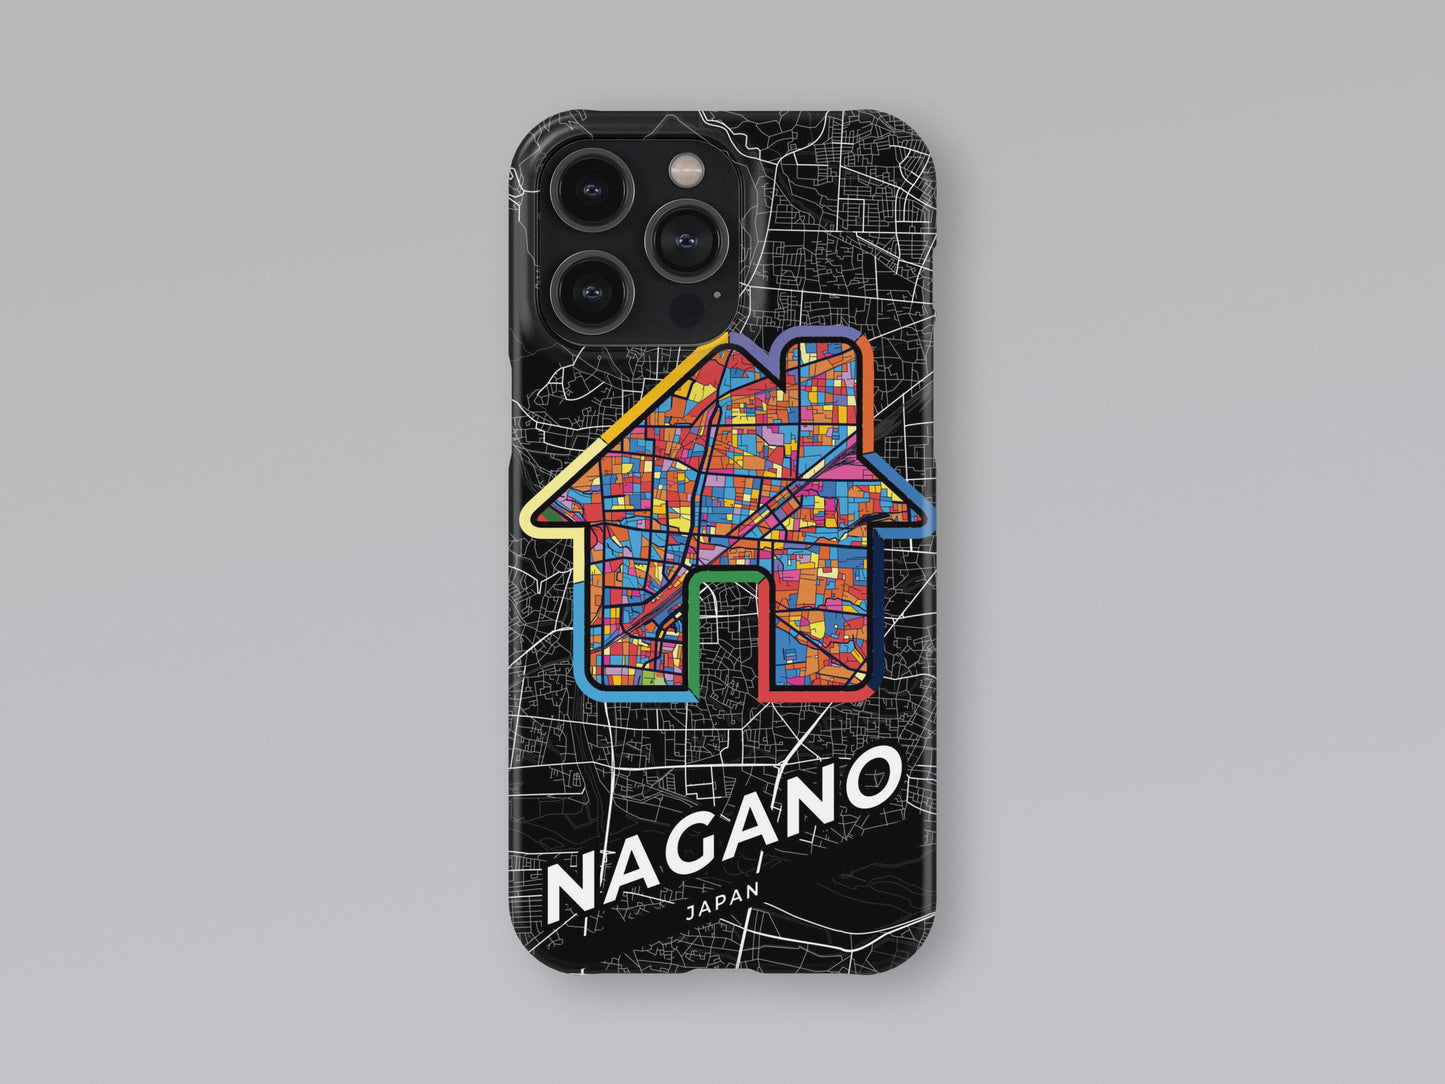 Nagano Japan slim phone case with colorful icon 3